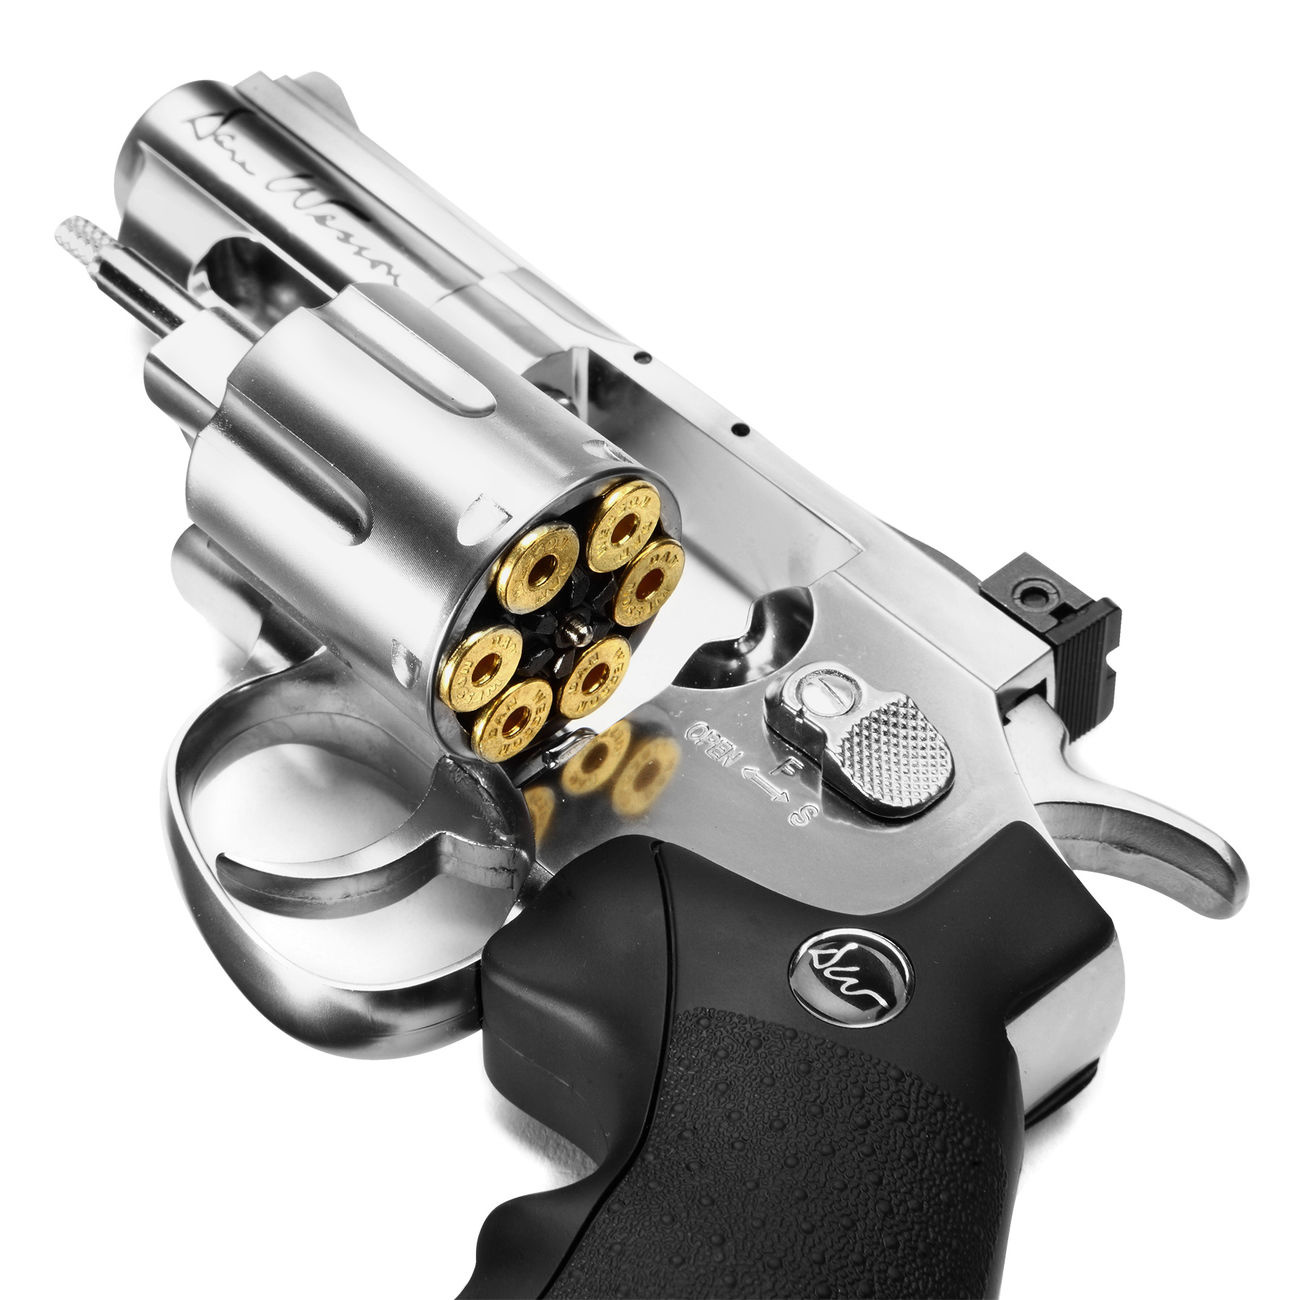 ASG 2.5 inch Dan Wesson 4.5 mm BB 2.0 Joule - Silver